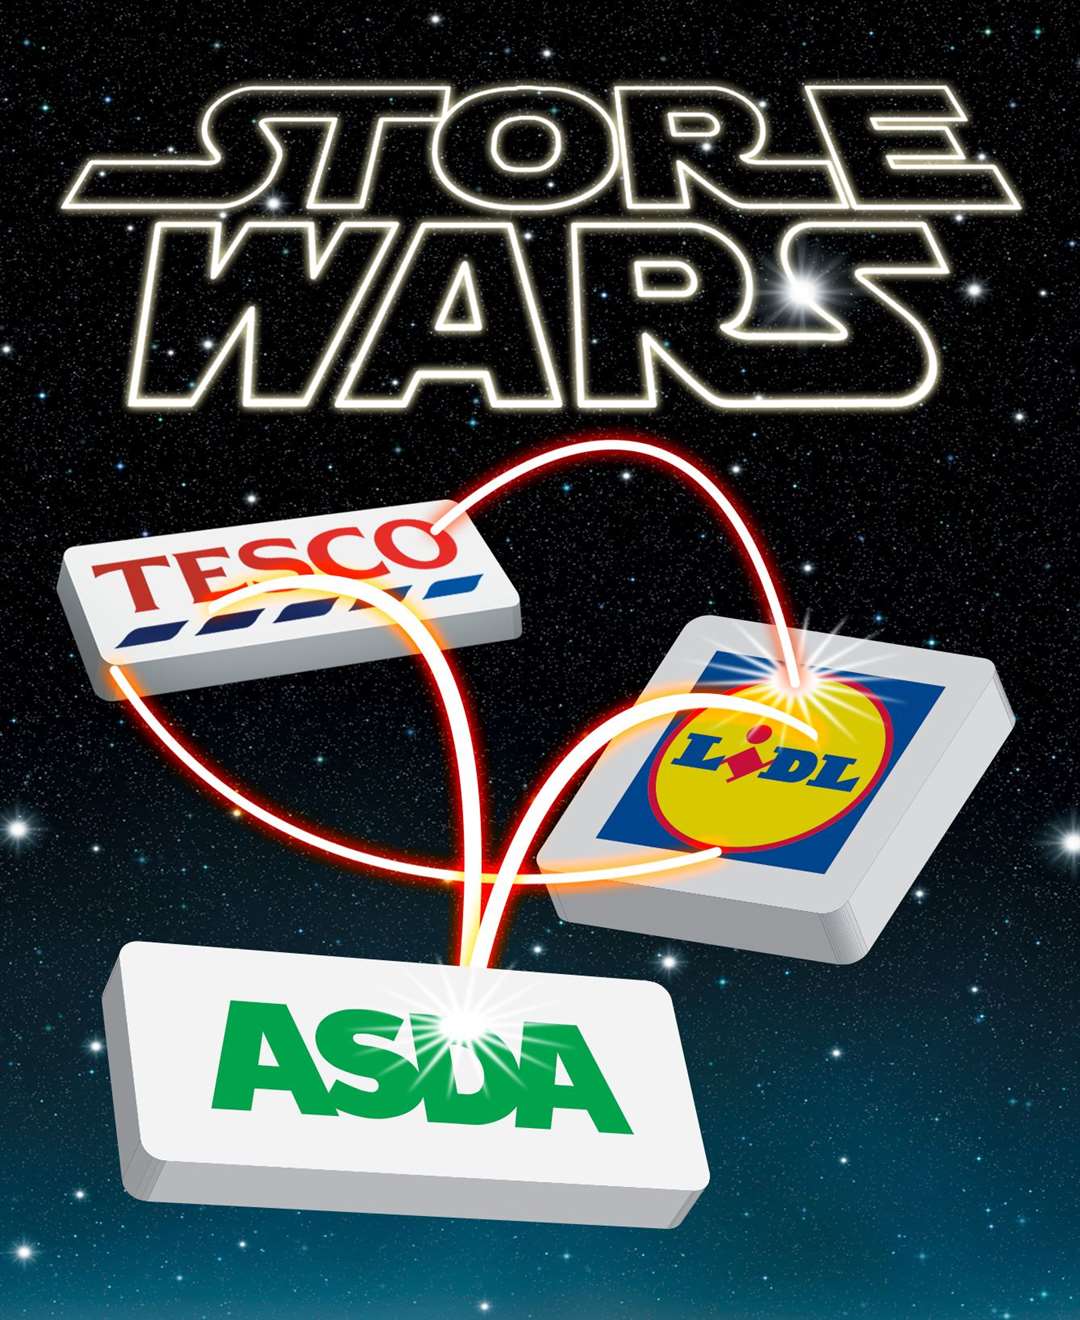 Store Wars as Tesco and Asda oppose Lidl proposals in Gillingham (27366602)